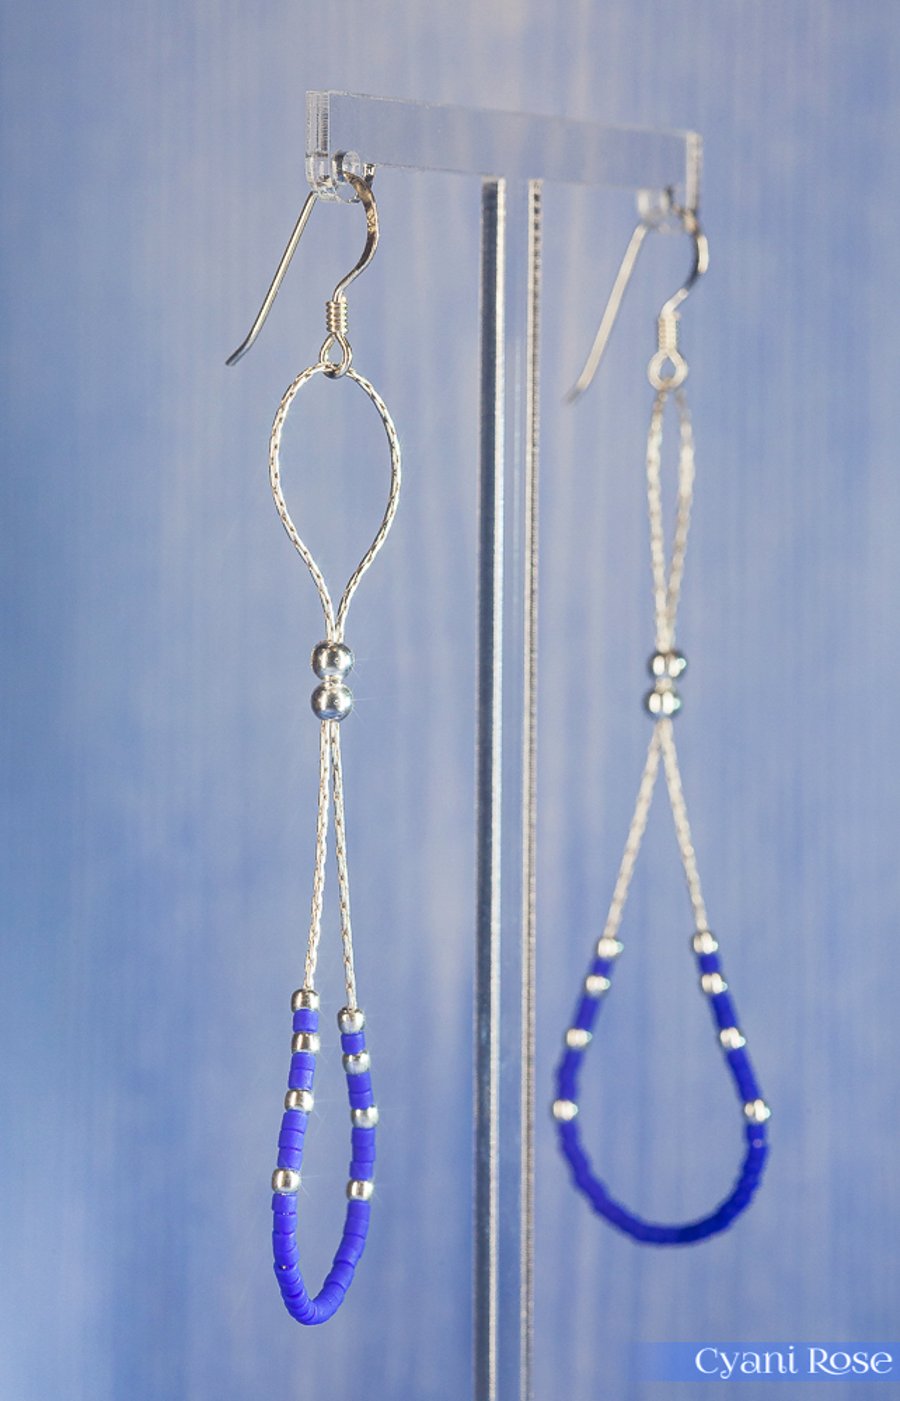 Drop earrings with silver chain, beads and dark blue seed beads 